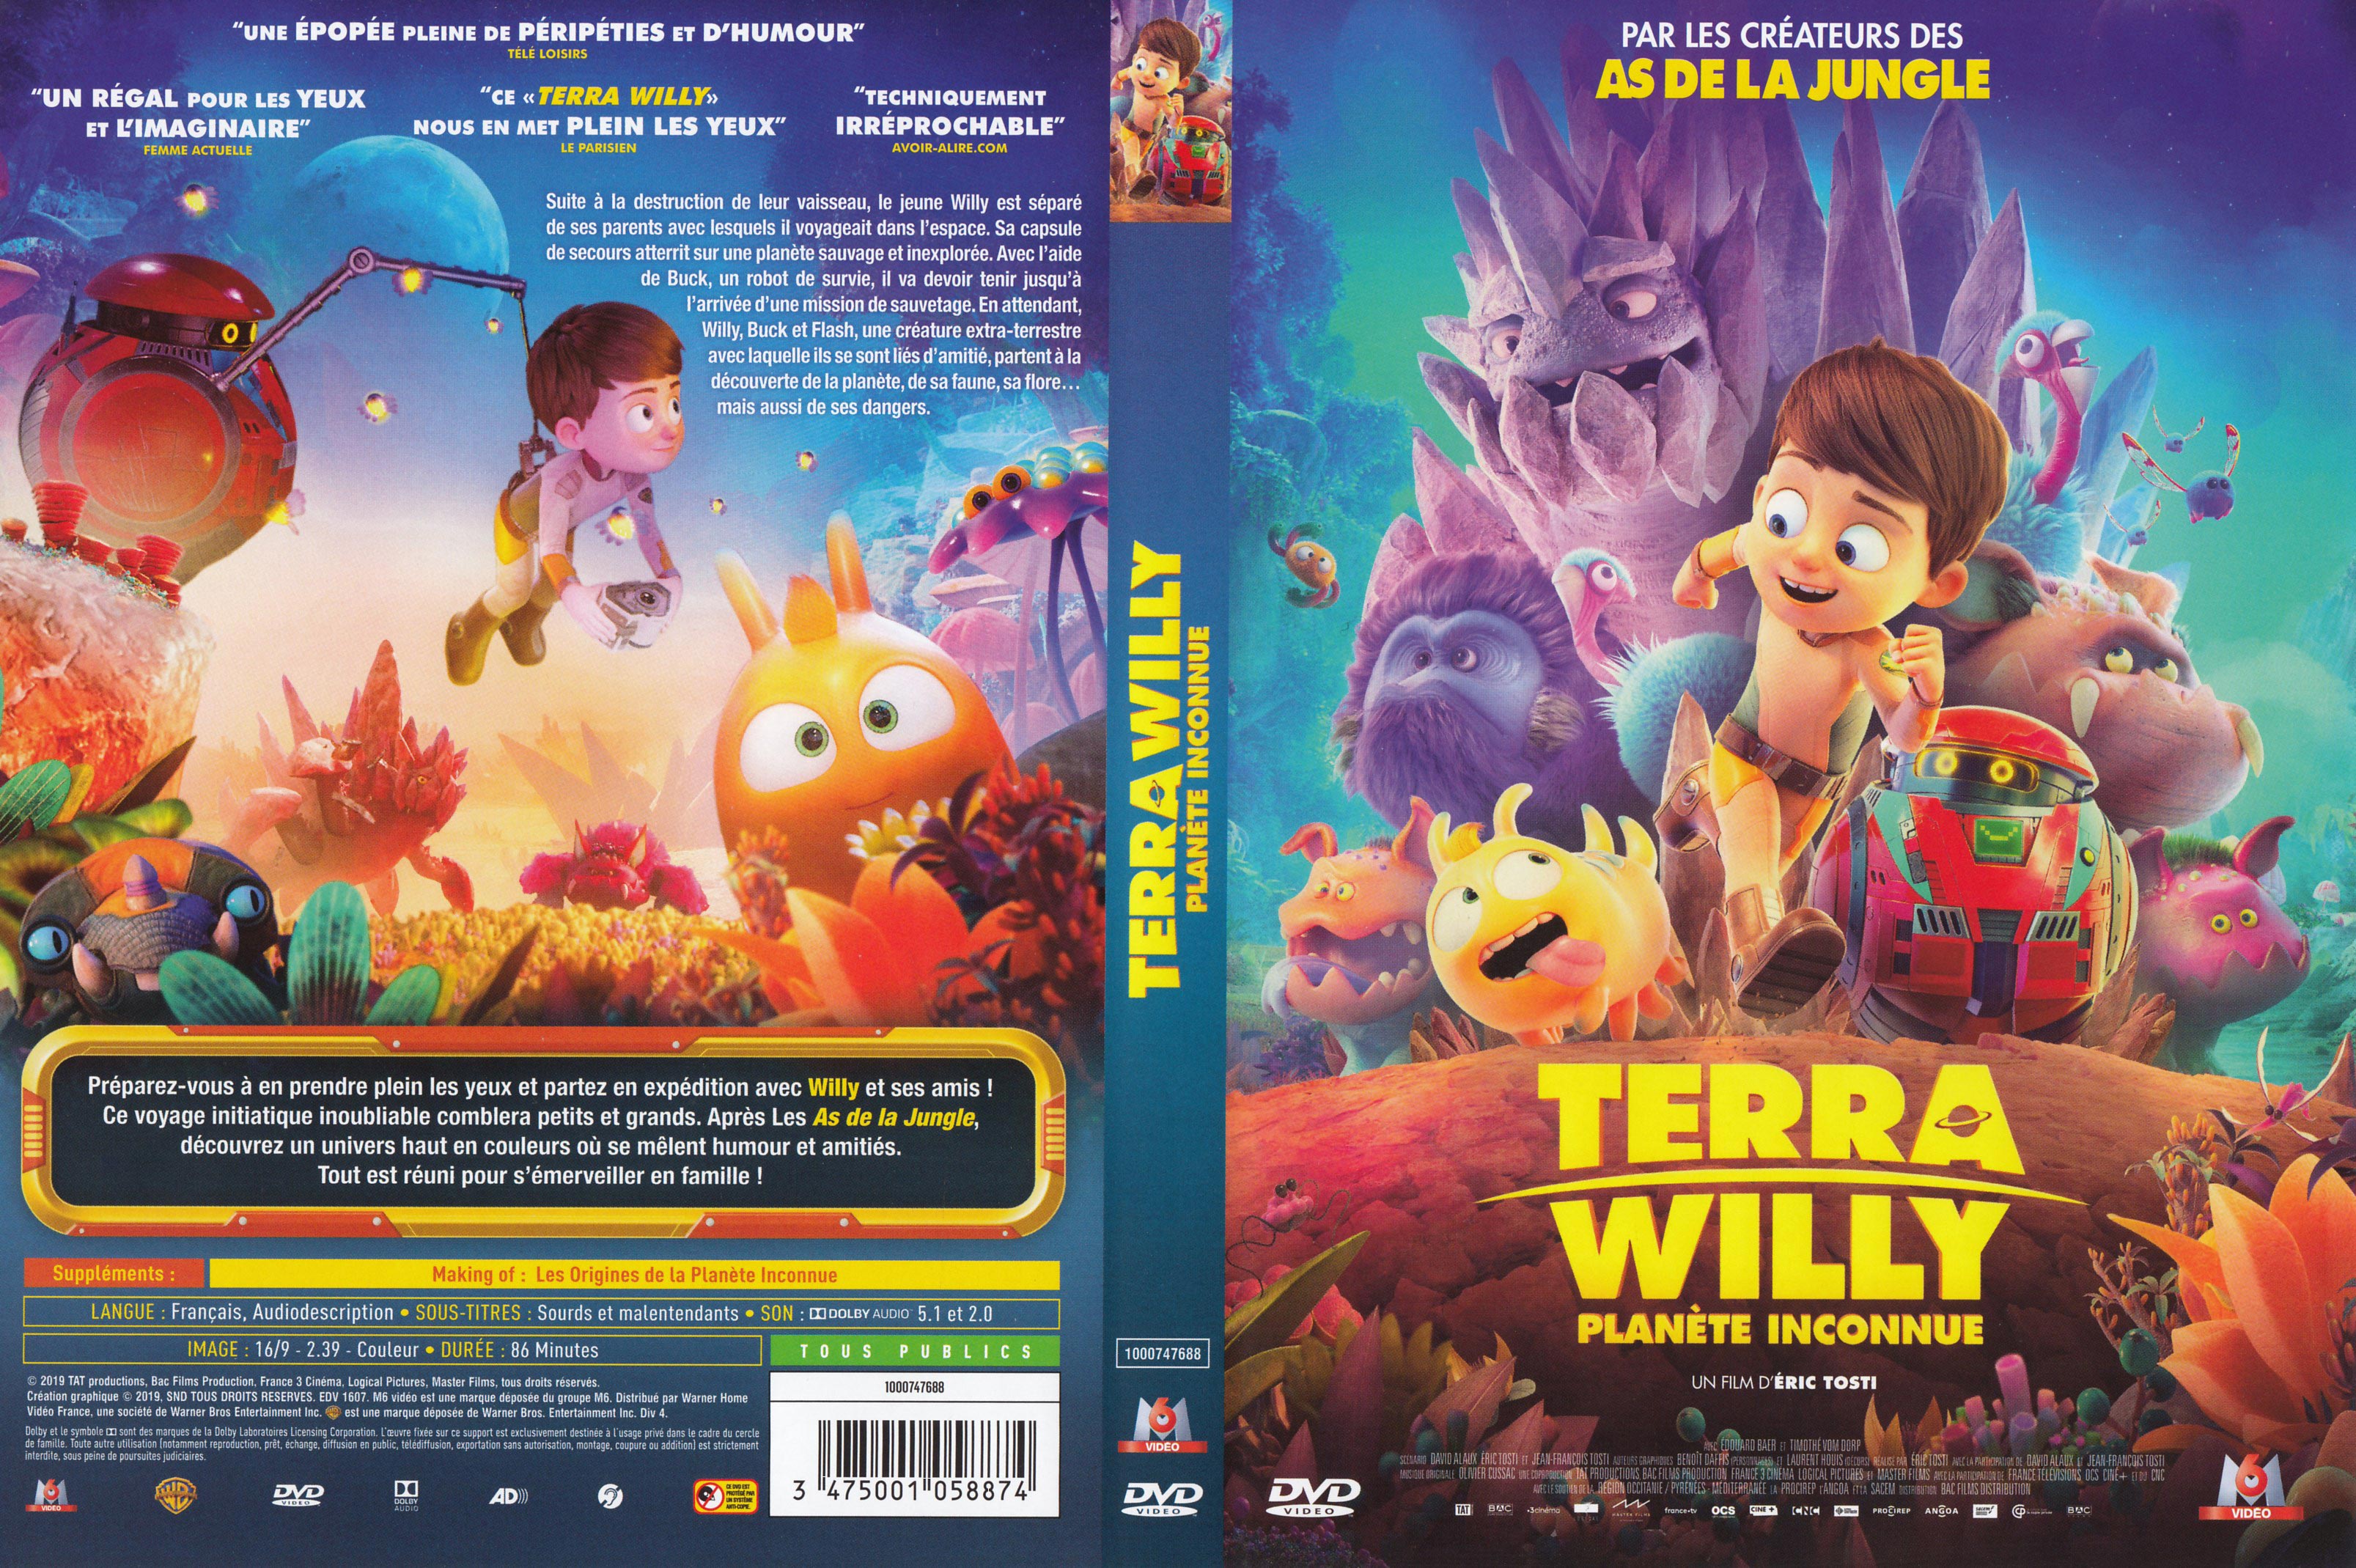 Jaquette DVD Terra Willy planete inconnue